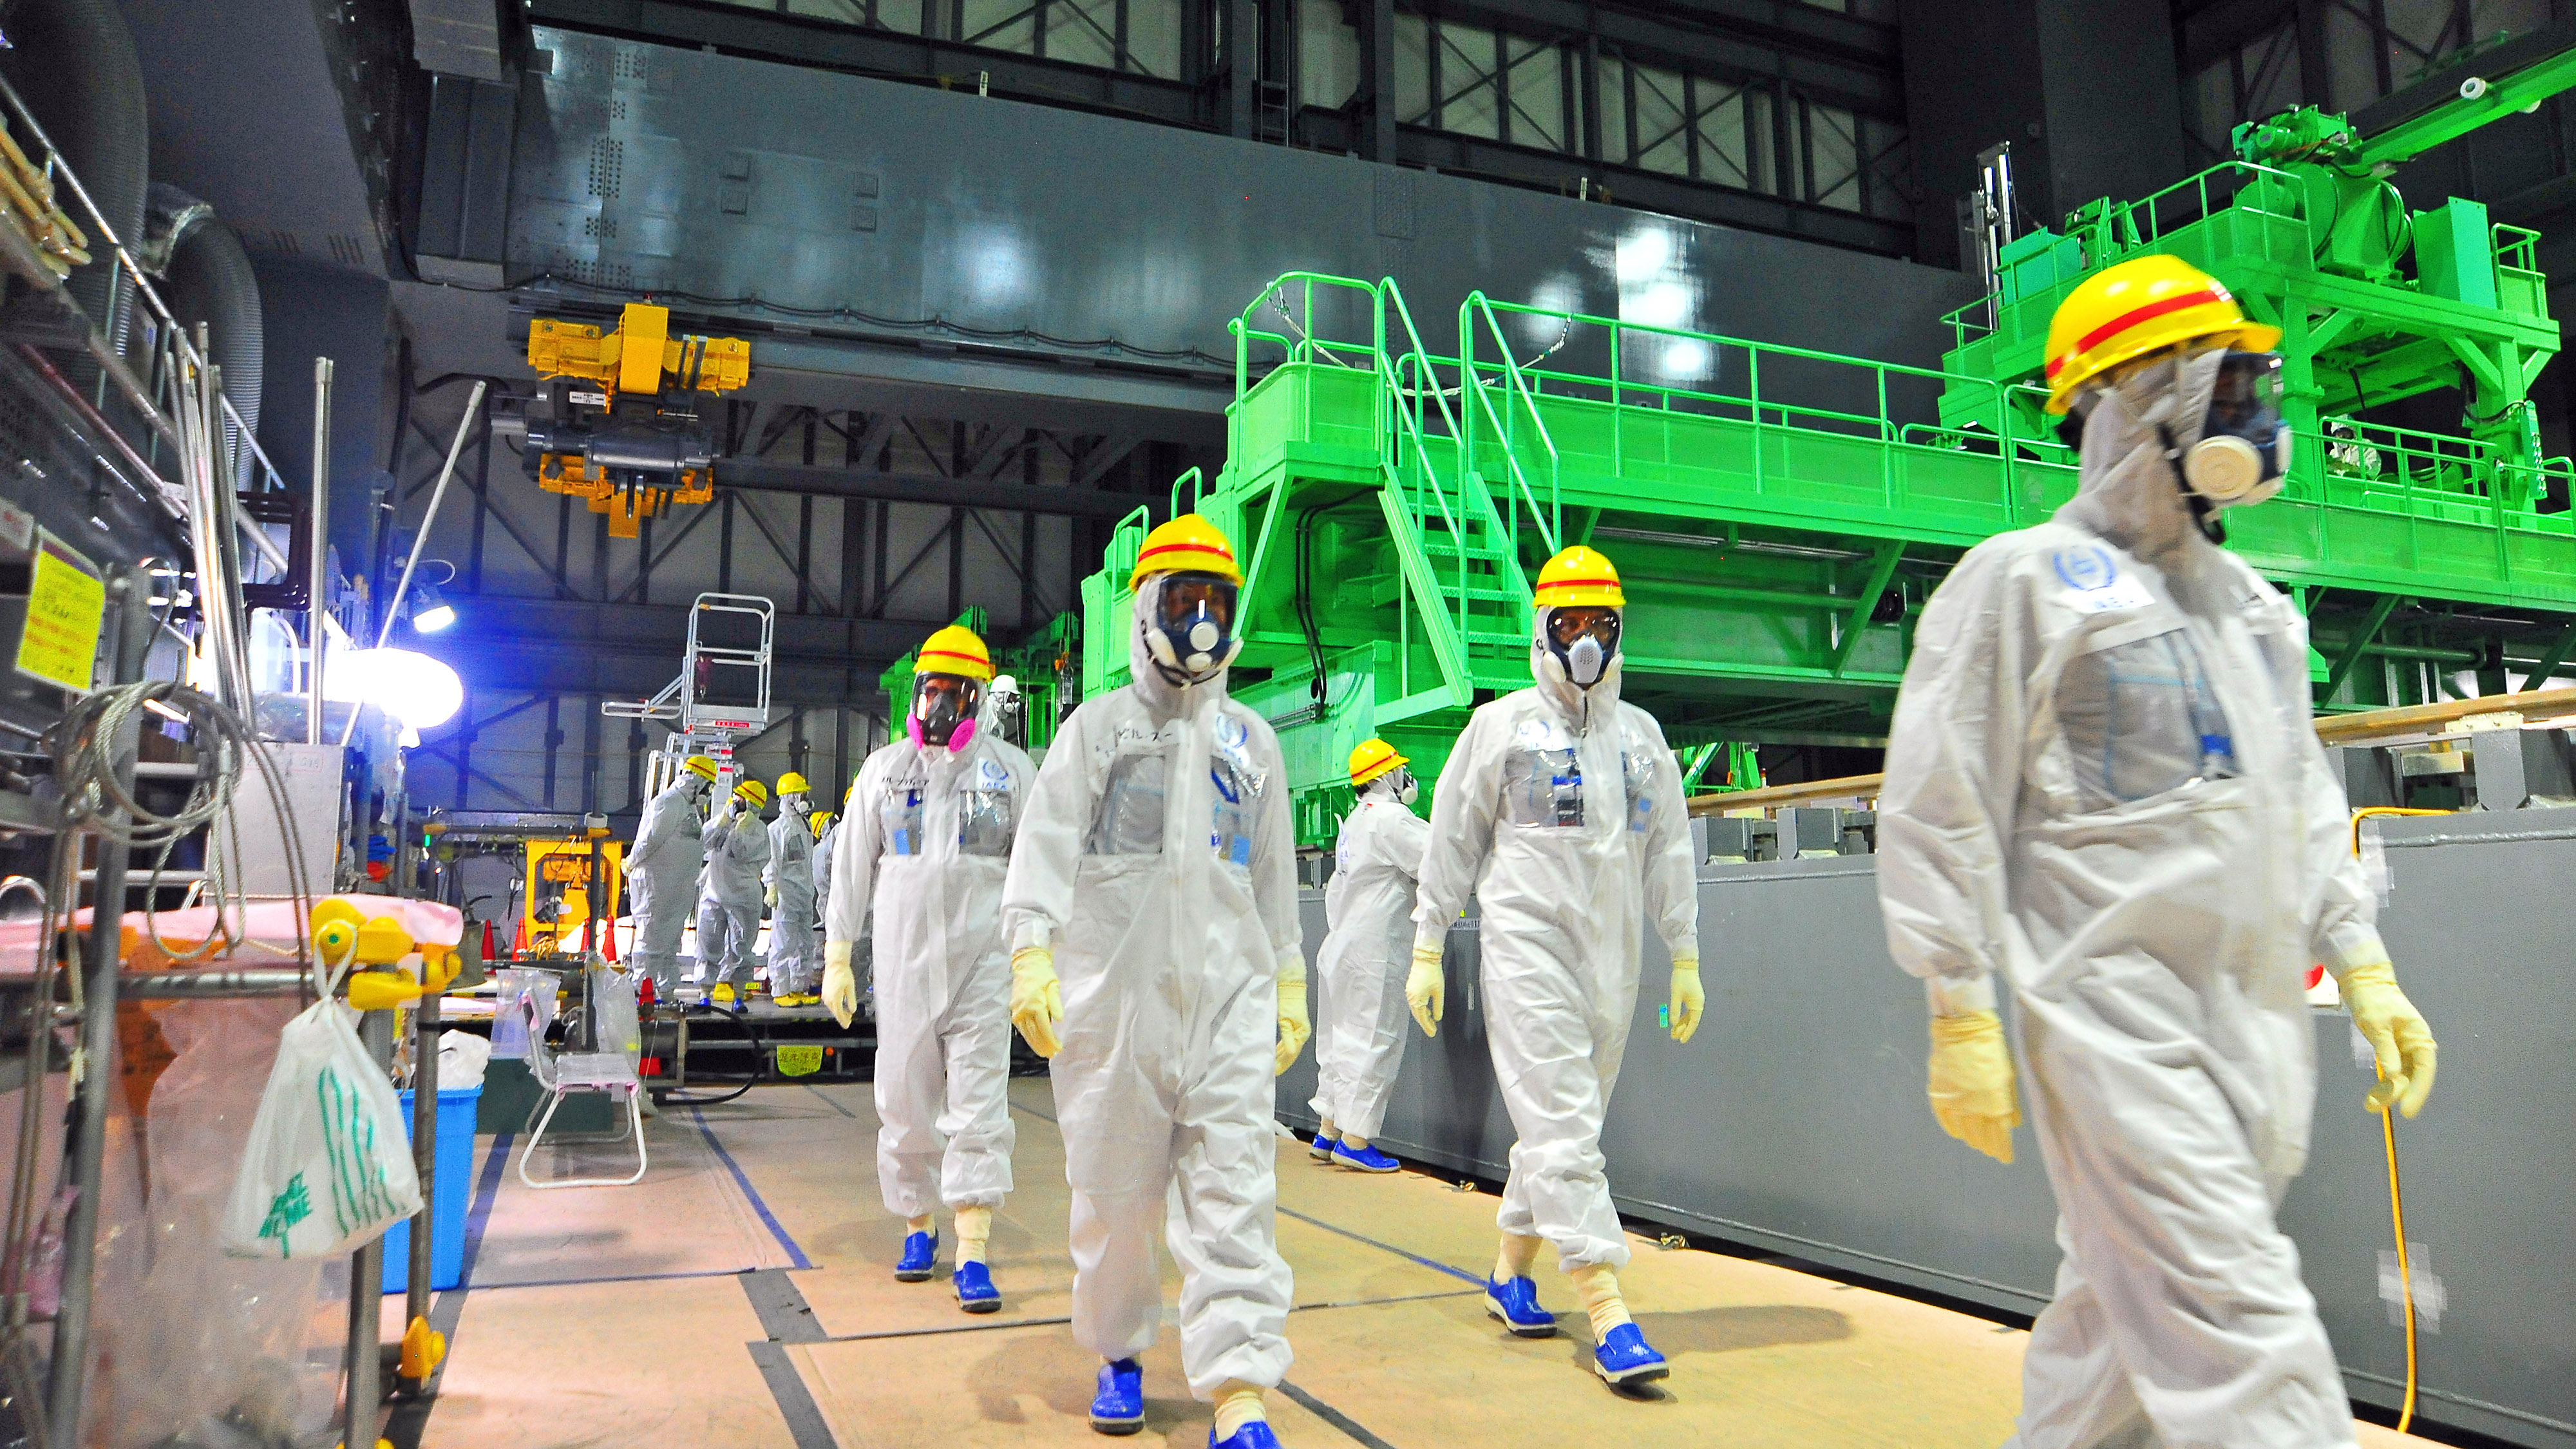 IAEA Delivers Final Report on Decommissioning Efforts at Fukushima